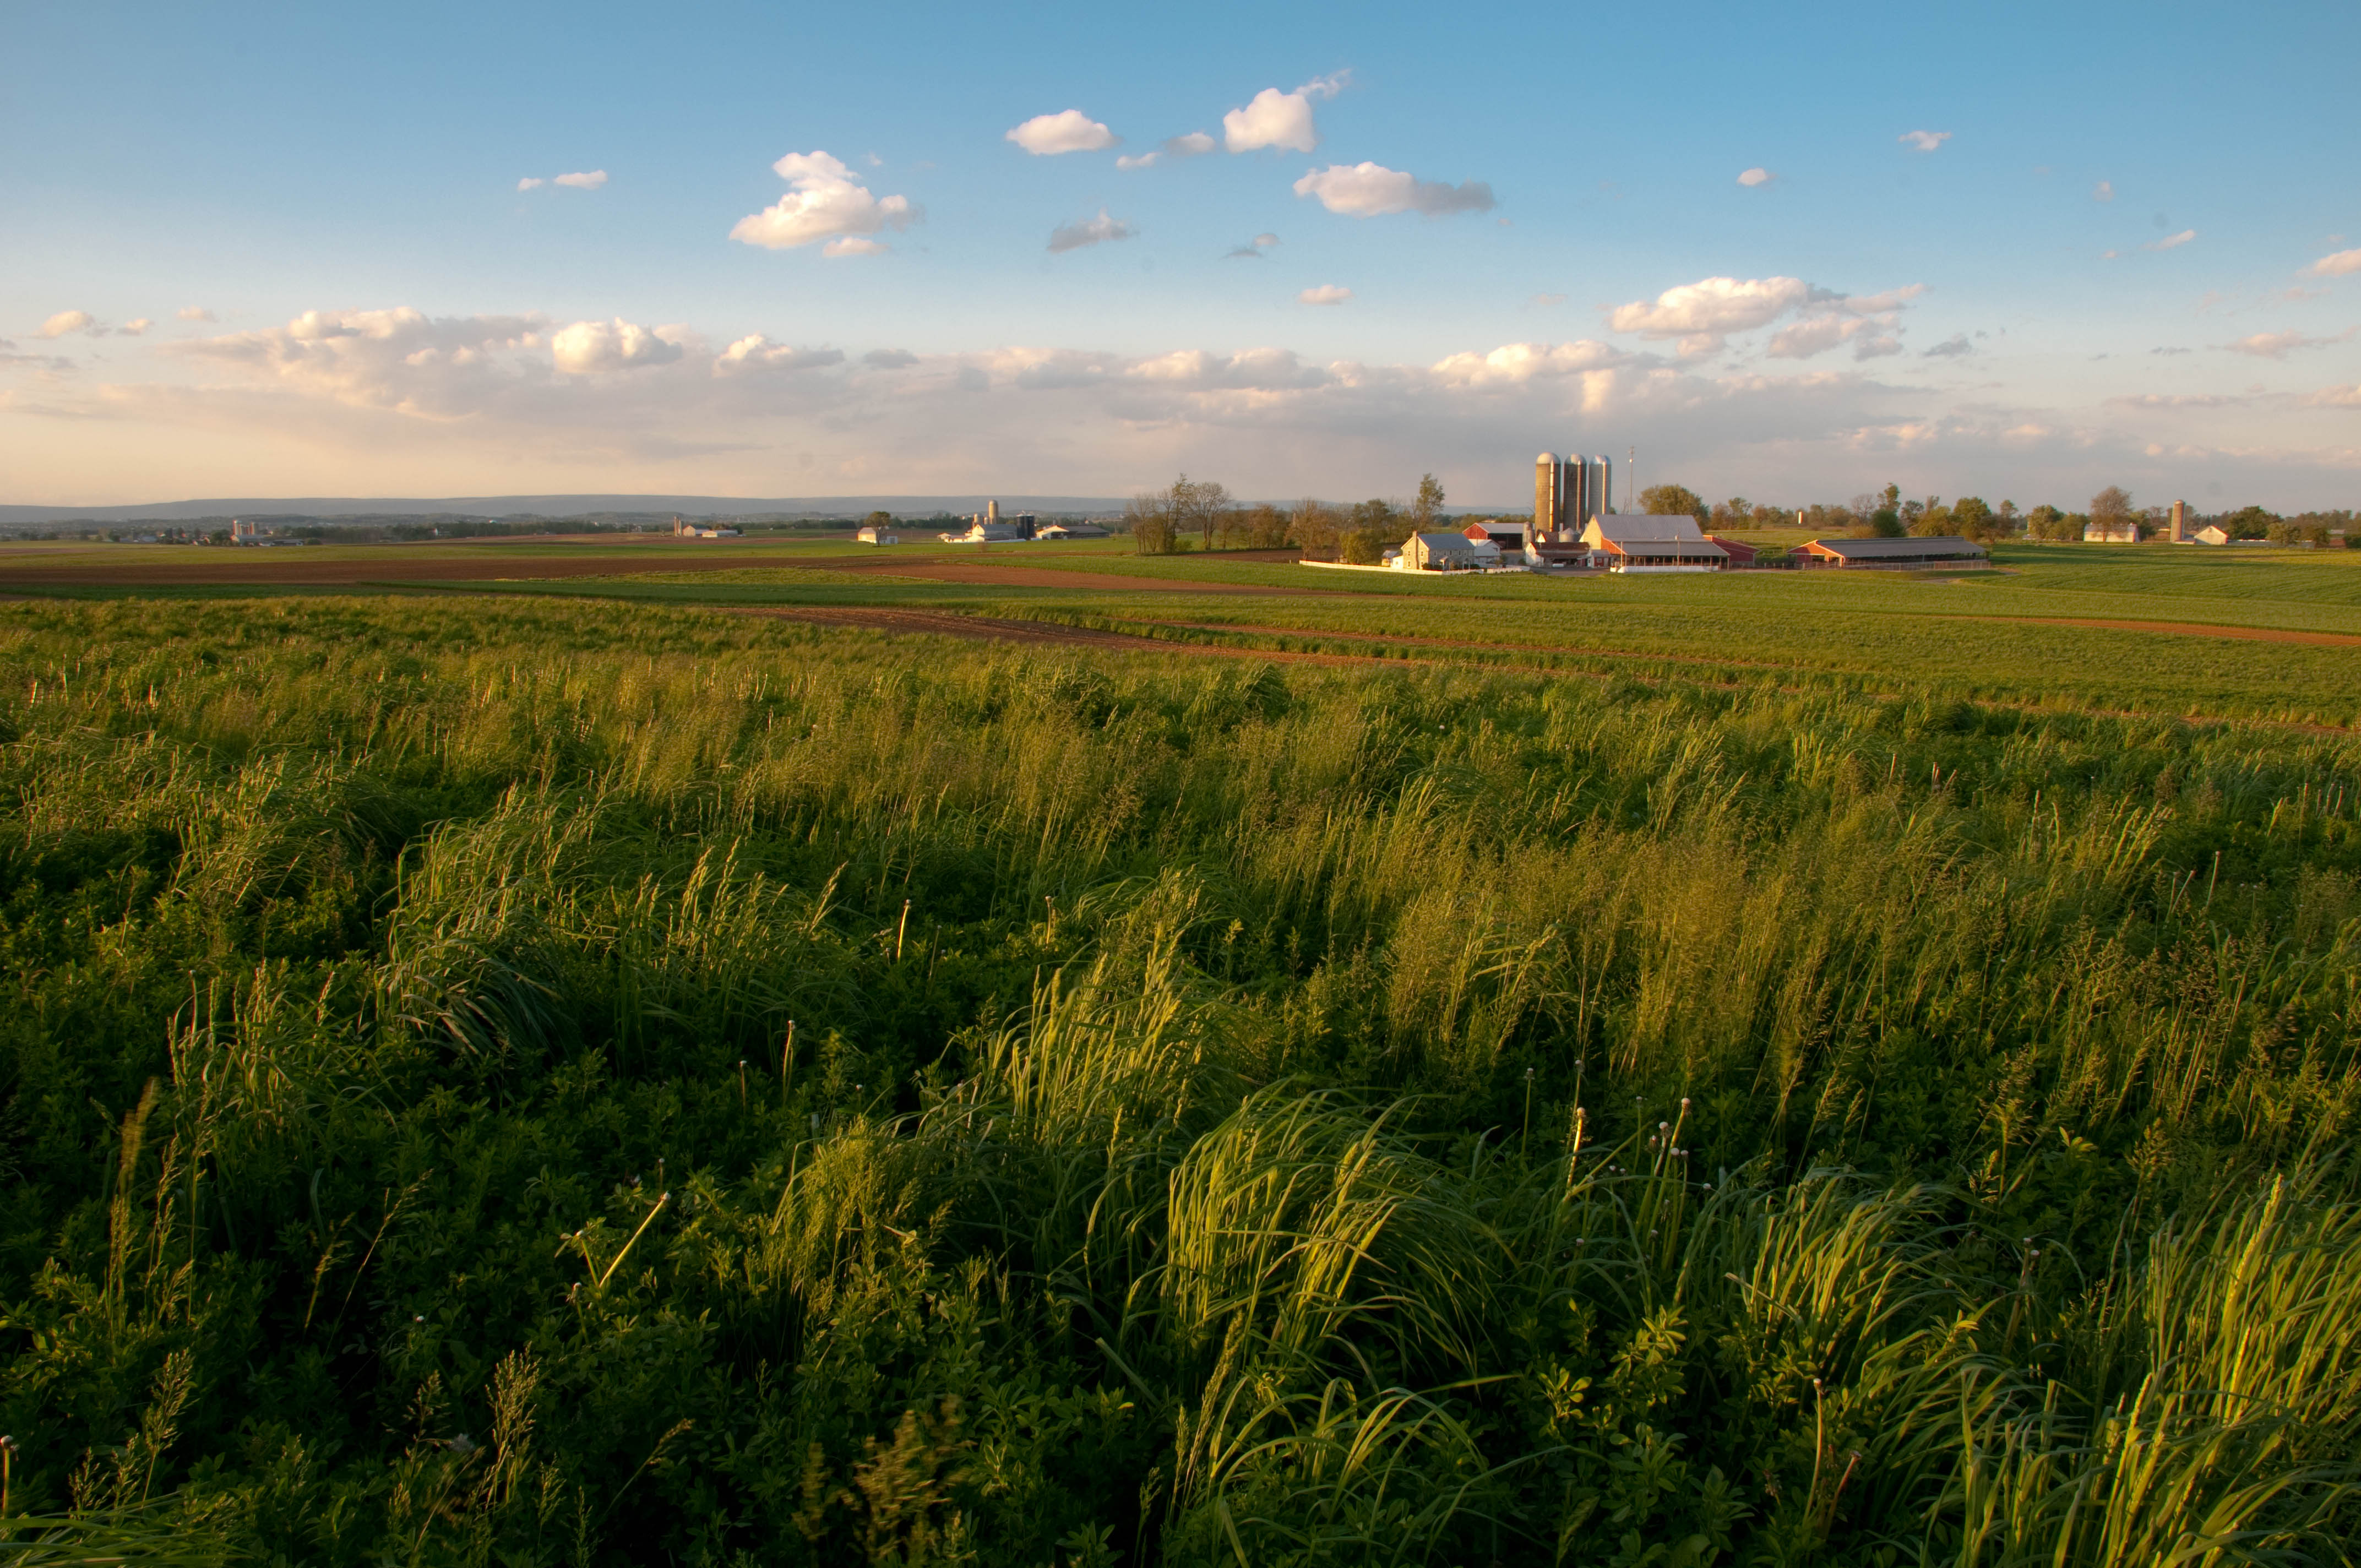 Tall grasses grow in the foreground at the edge of cultivated fields. Farm buildings and tall silos rise in the background.